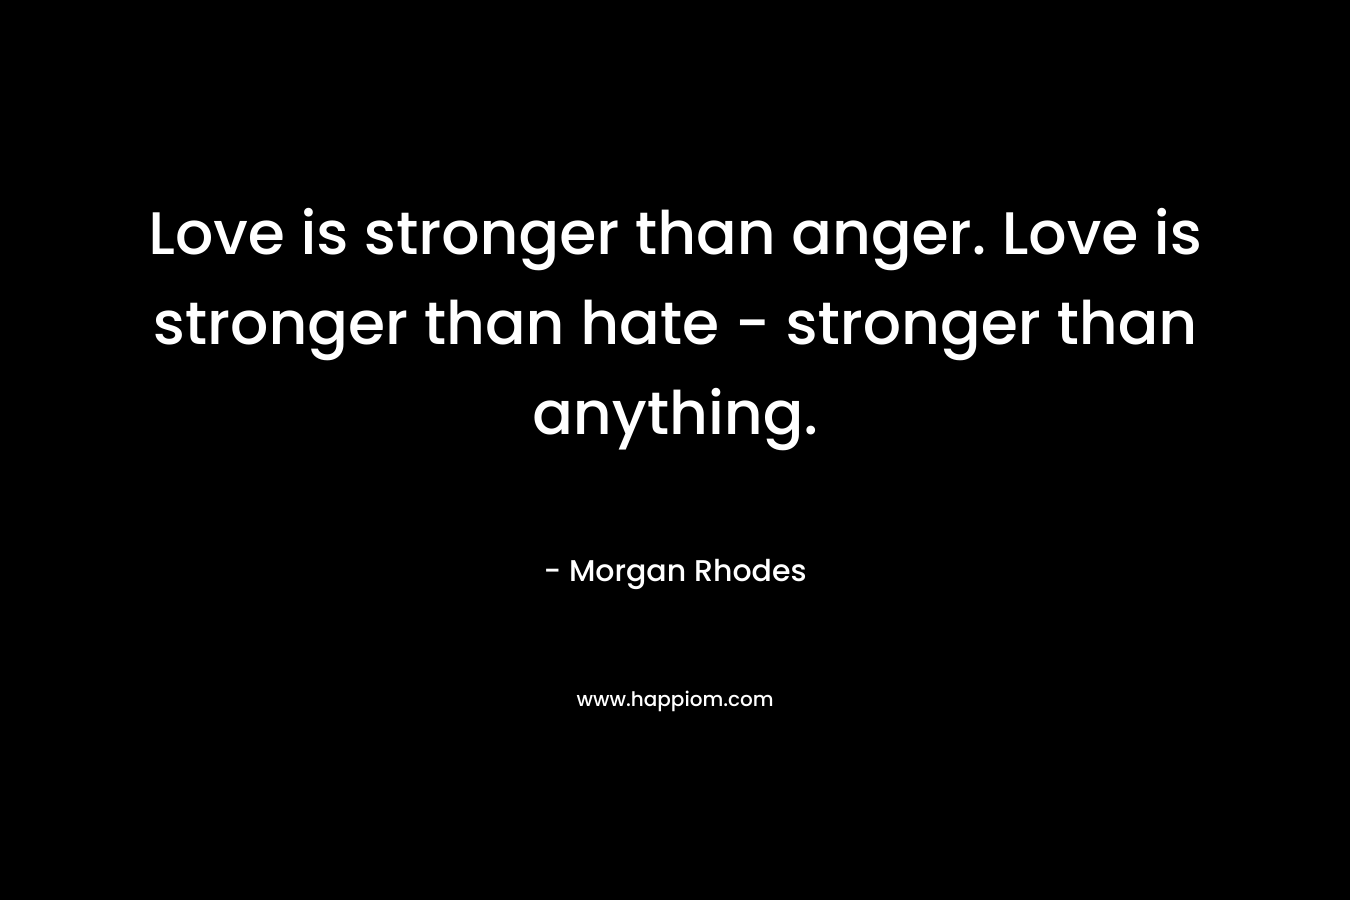 Love is stronger than anger. Love is stronger than hate - stronger than anything.